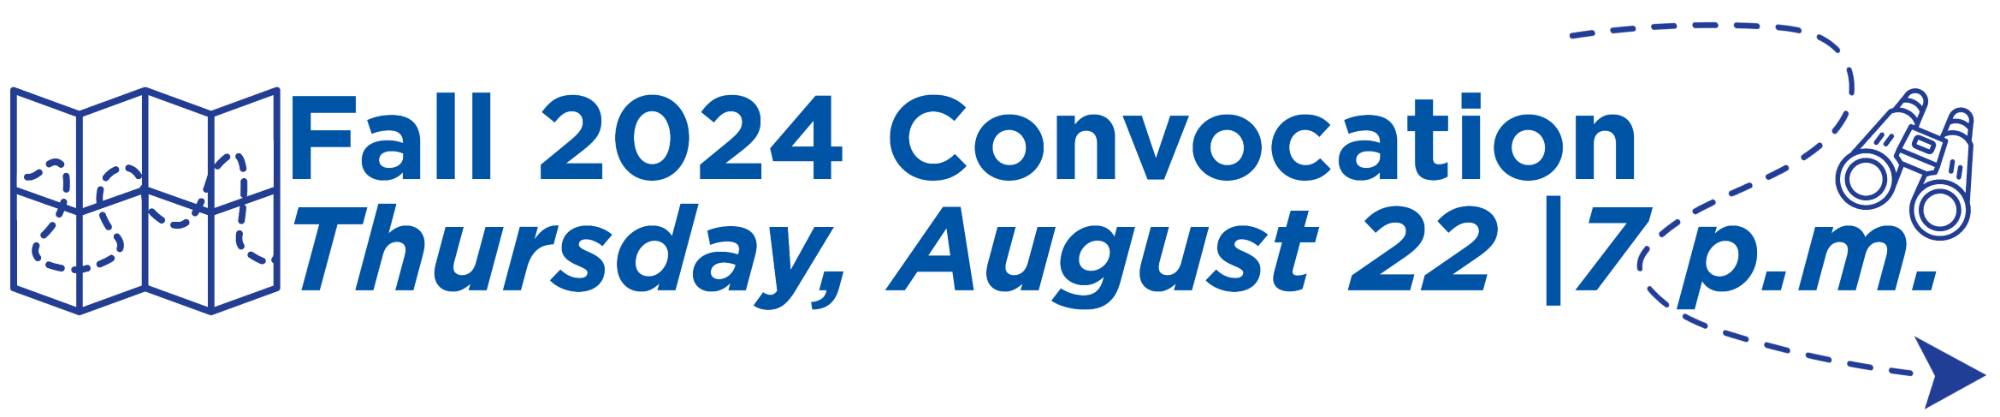 Fall 2024 Convocation, Thursday, August 22 7 p.m. and arrow graphic